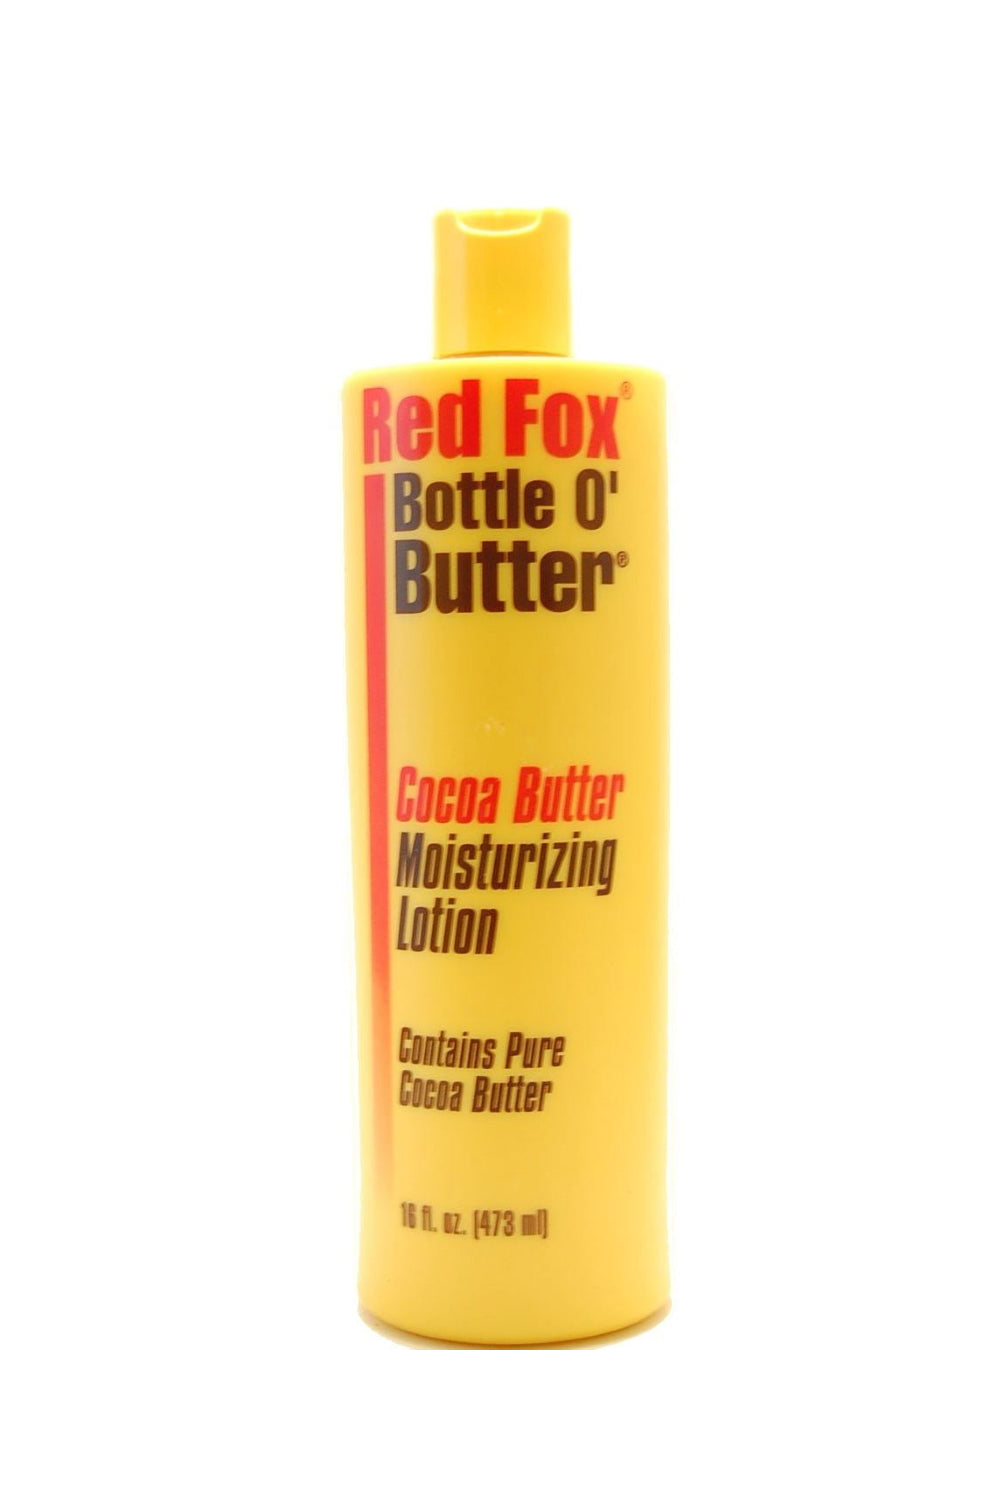 Red Fox - Cocoa Butter Moisturizing Lotion